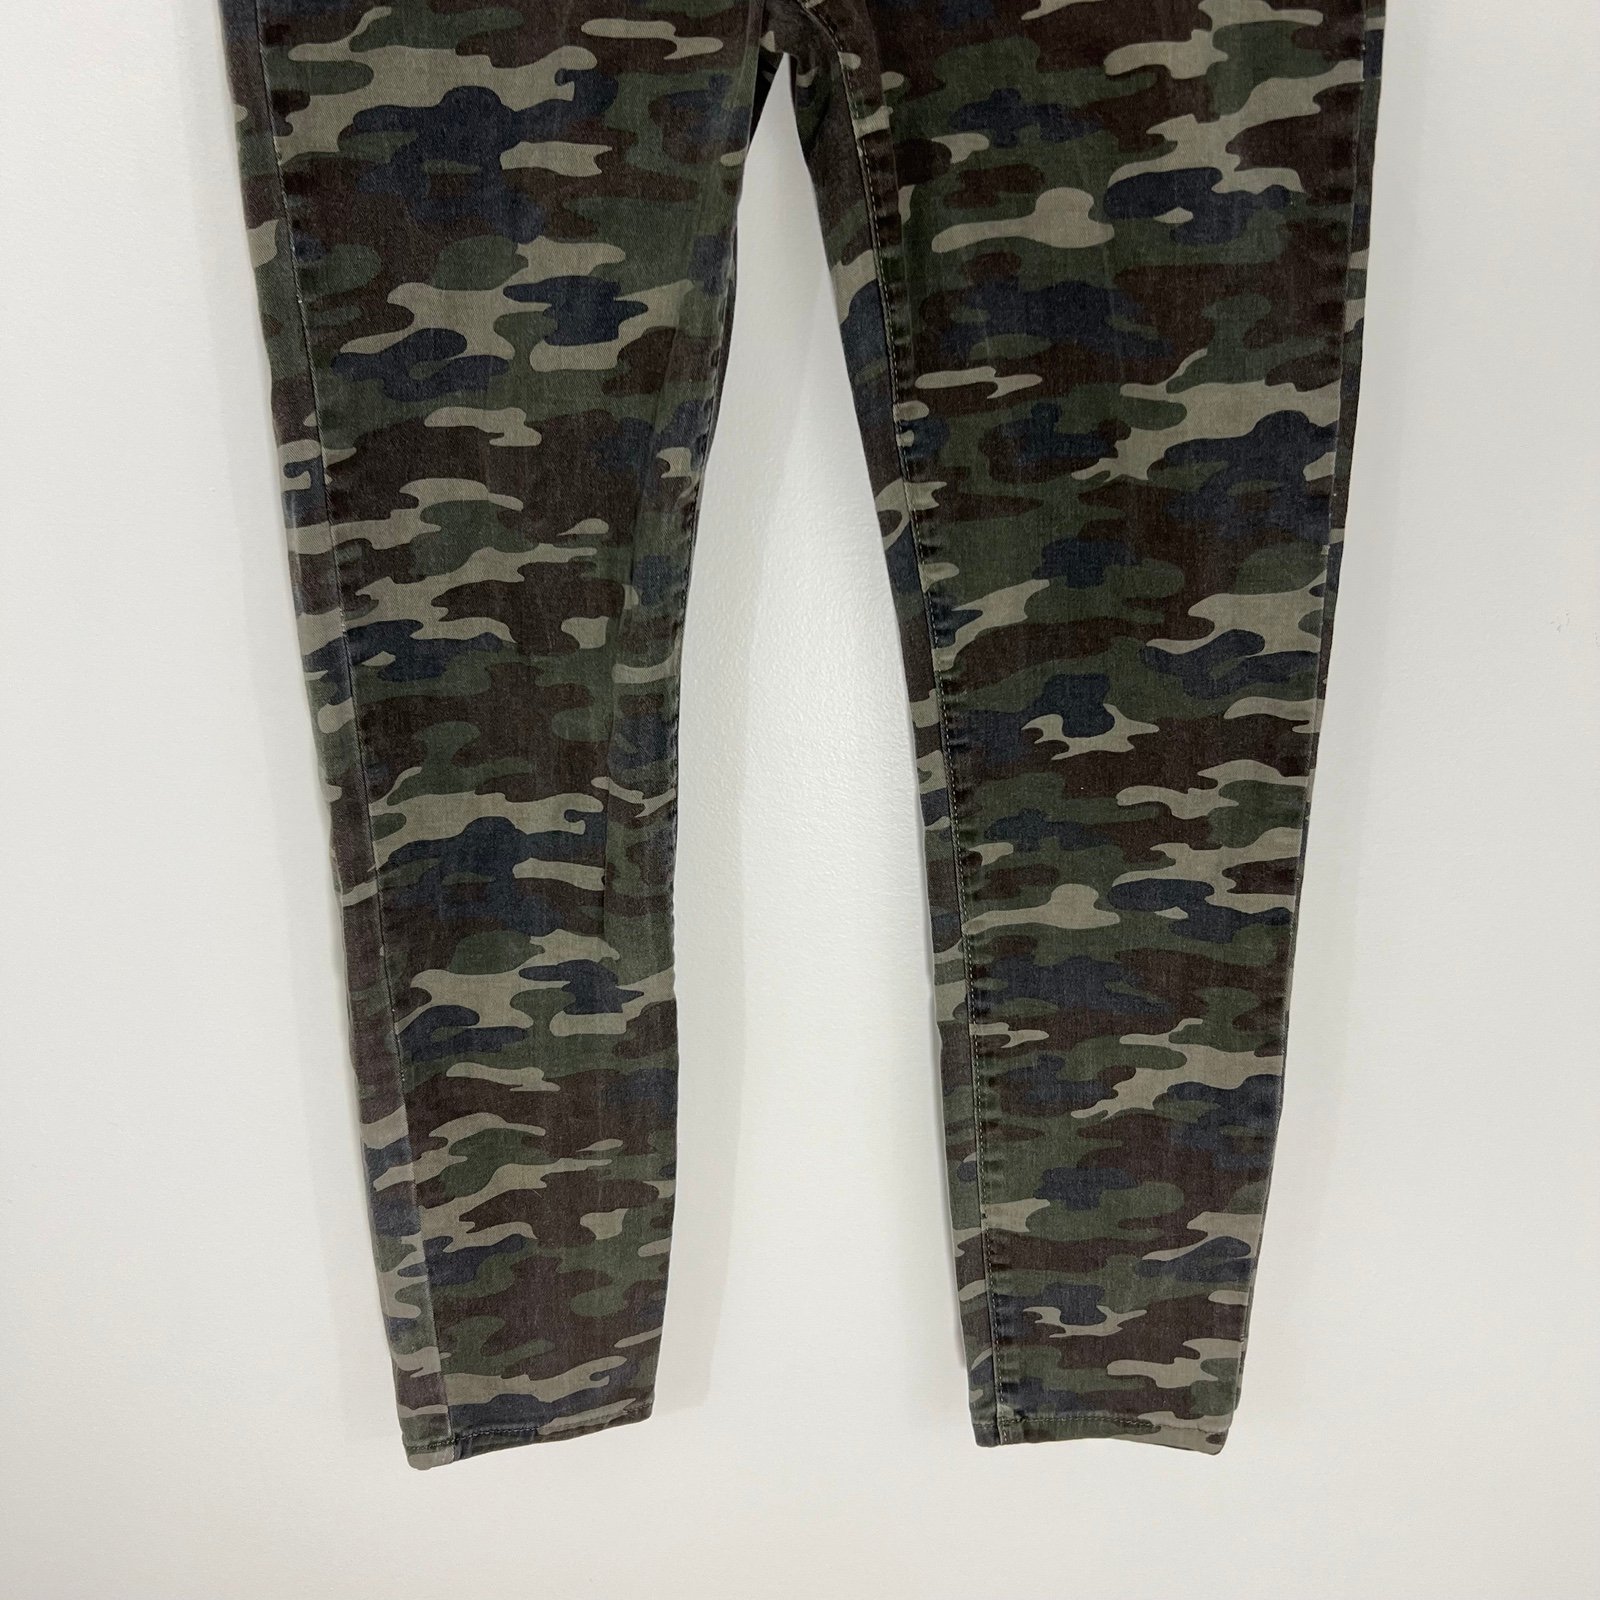 Fashion Free People Belle Camo High Rise Skinny Jeans Size 28 FH78zfUqt just buy it